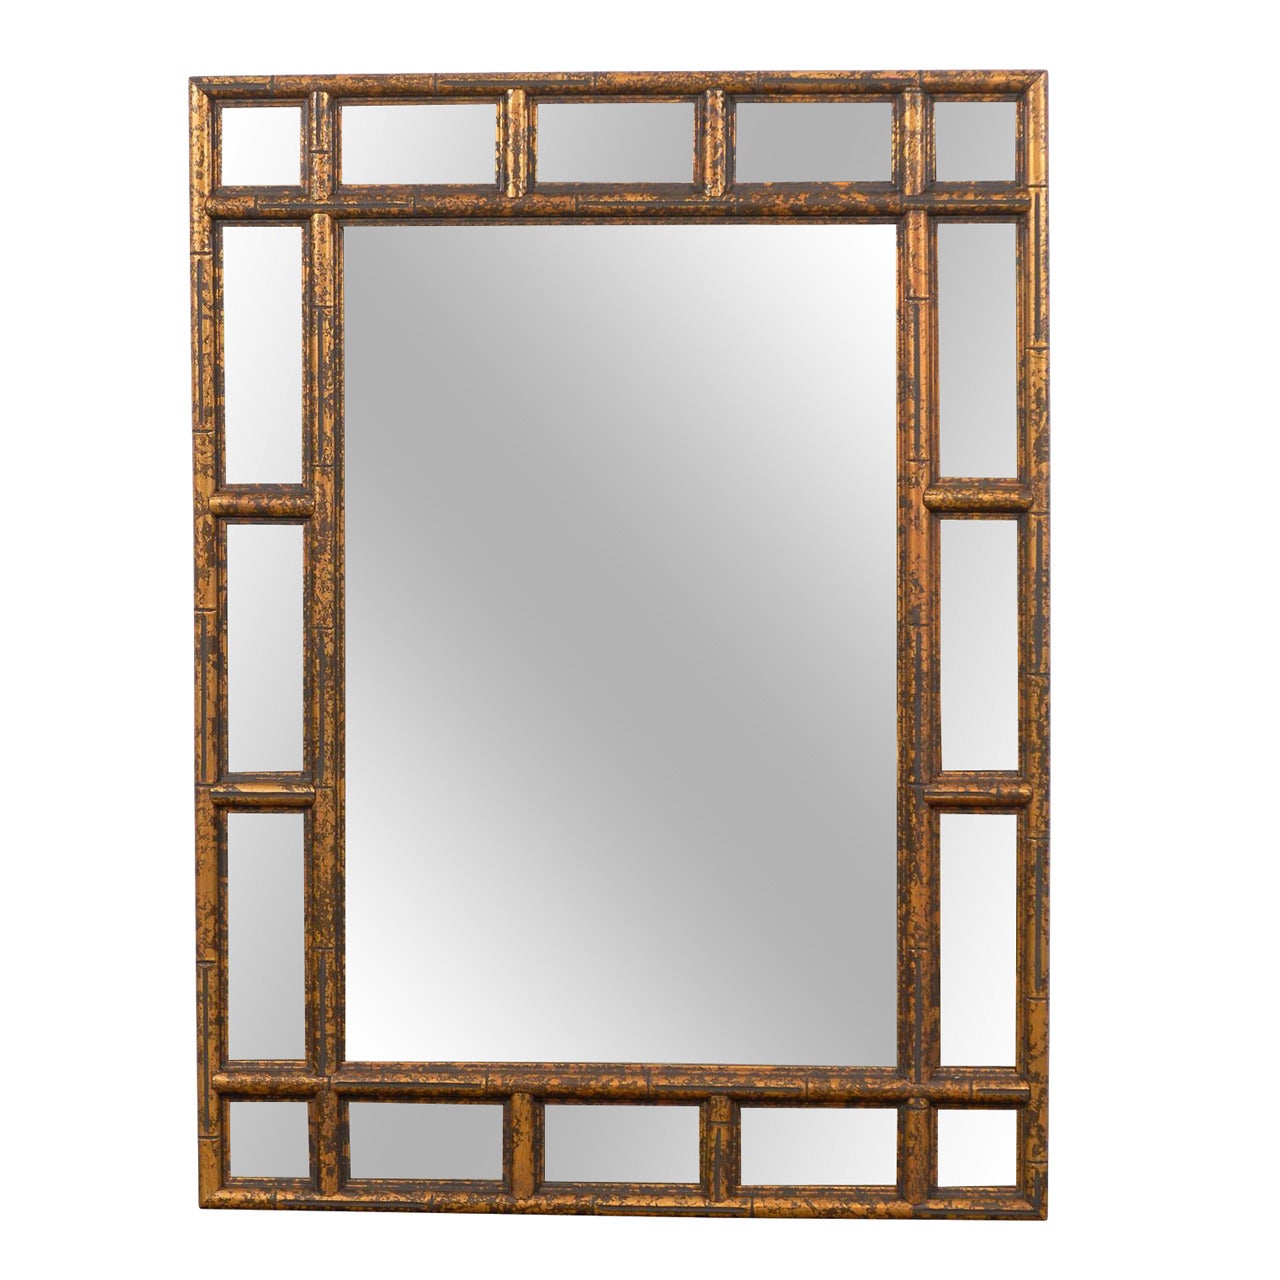 Gilded Faux bamboo carved wood mirror